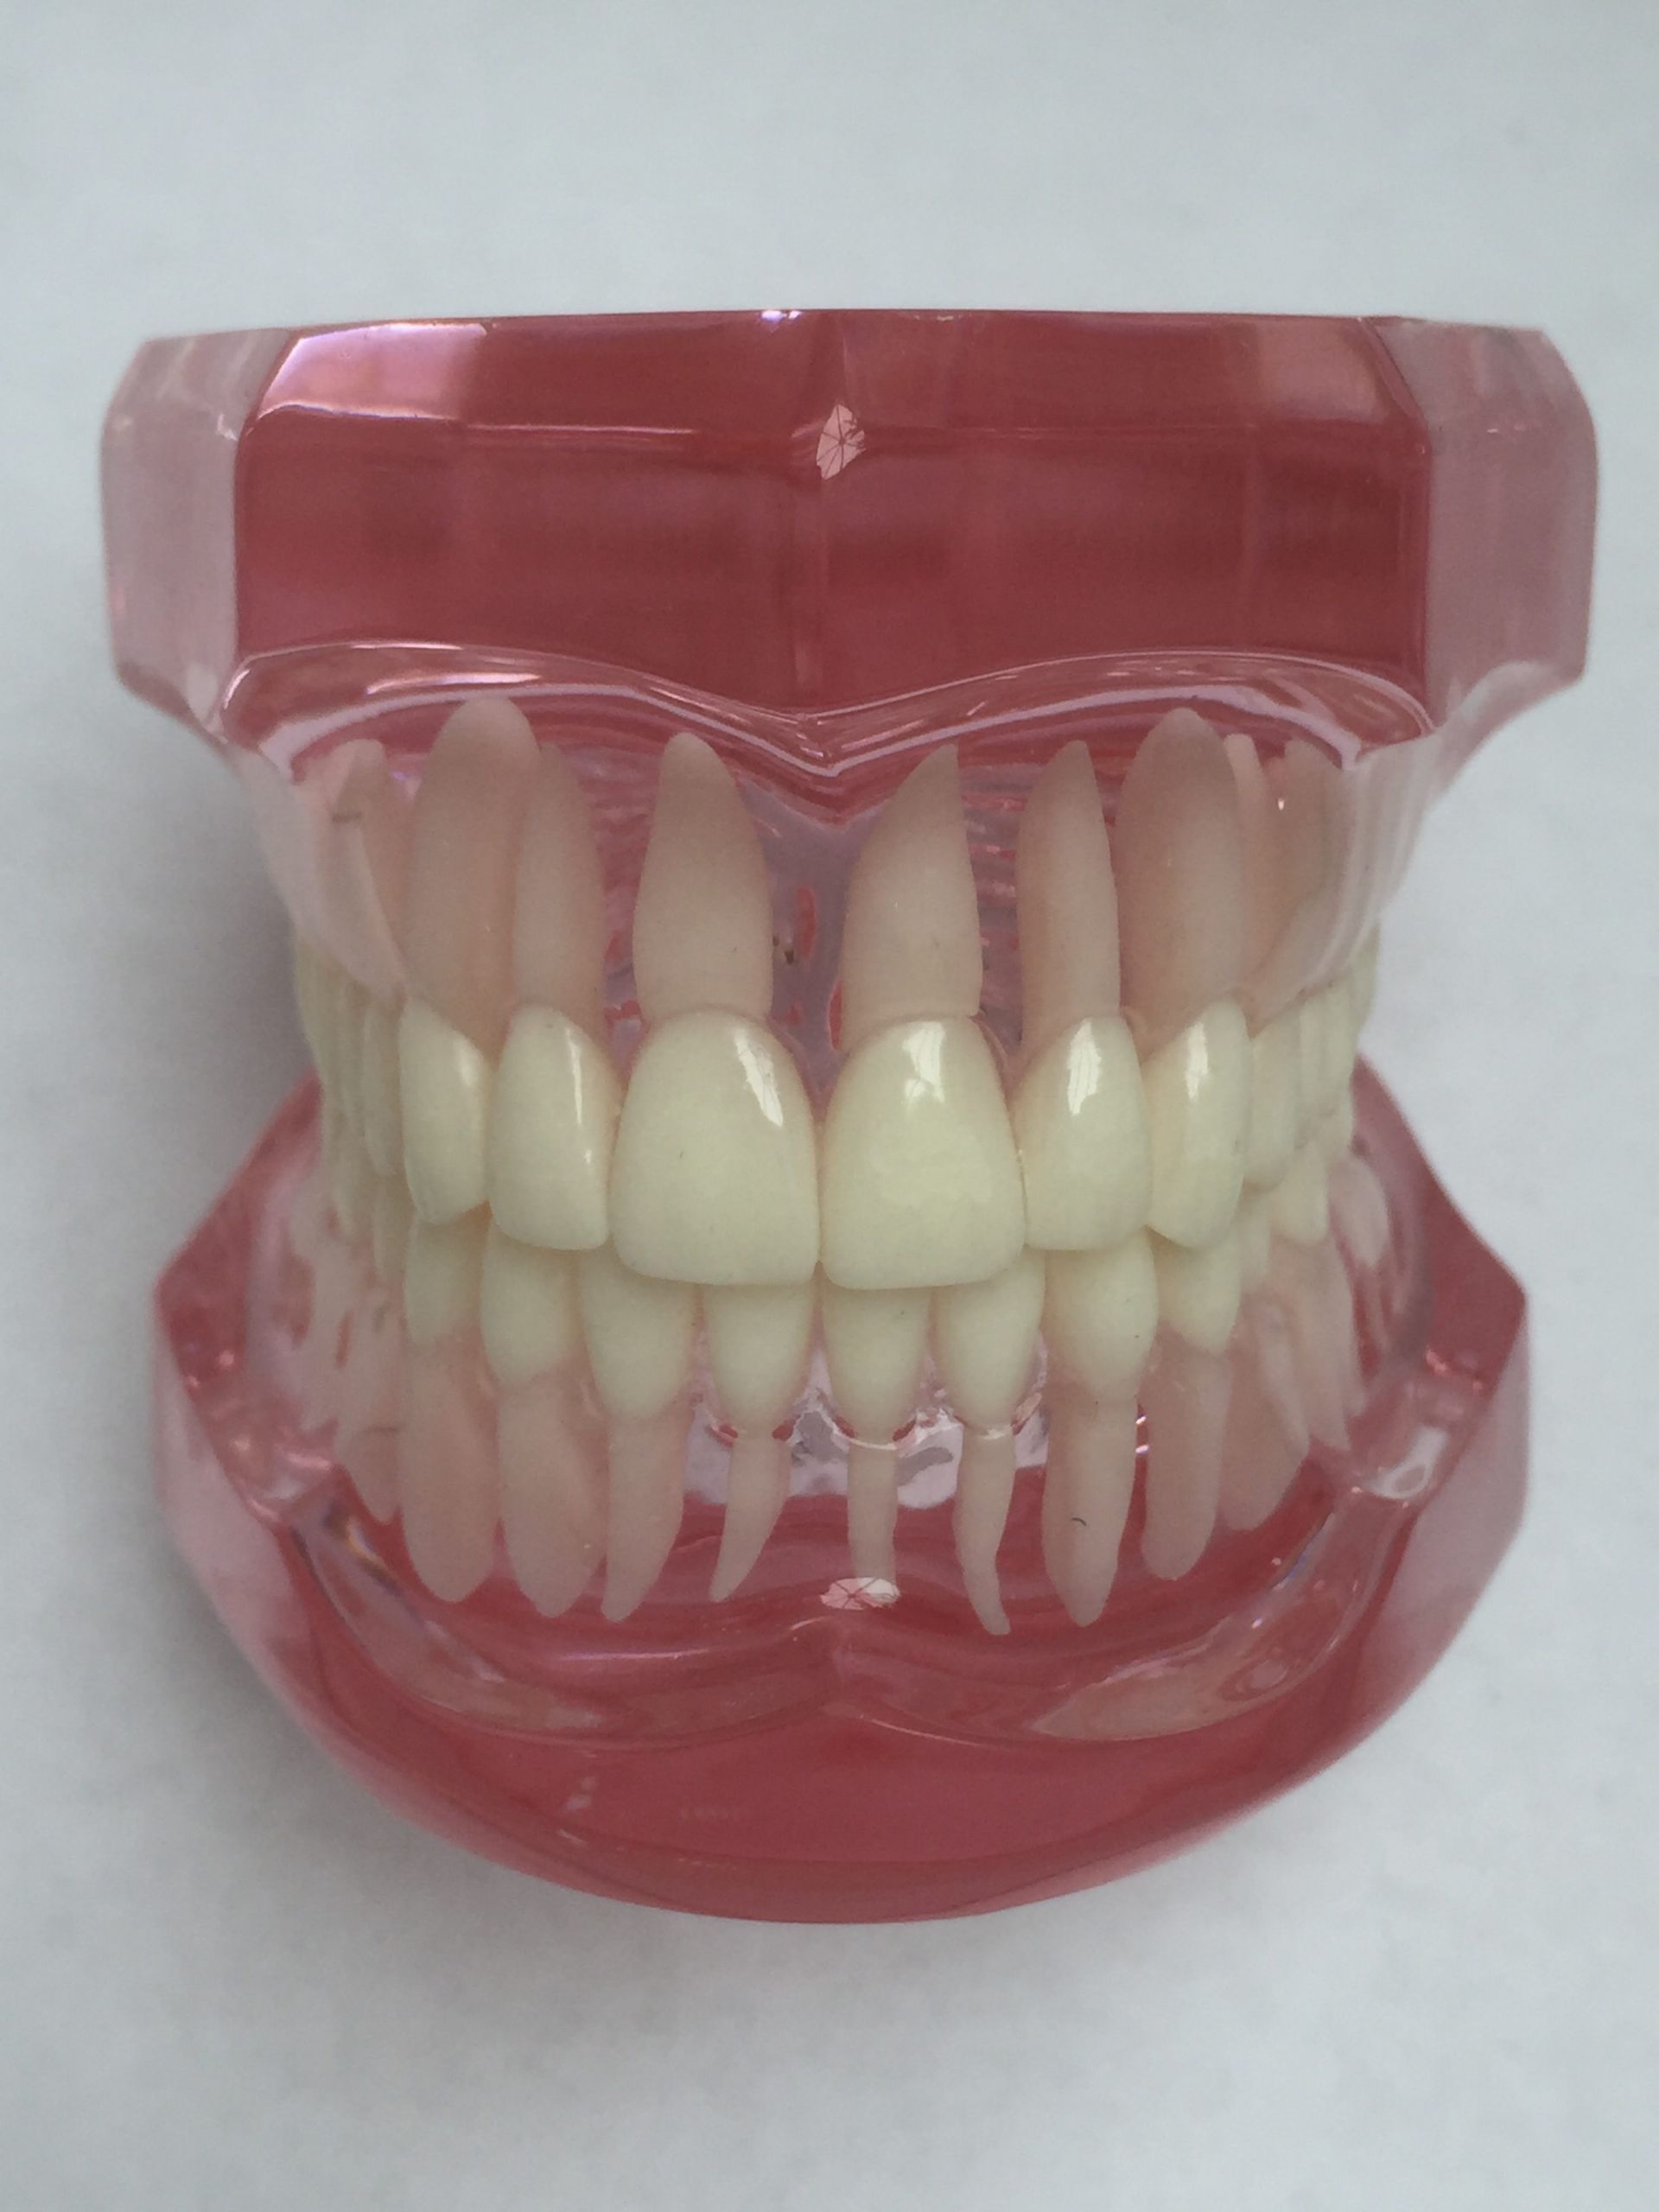 Gestenco Offers Freddy Ceramic Button and Hook for Aligner Treatment